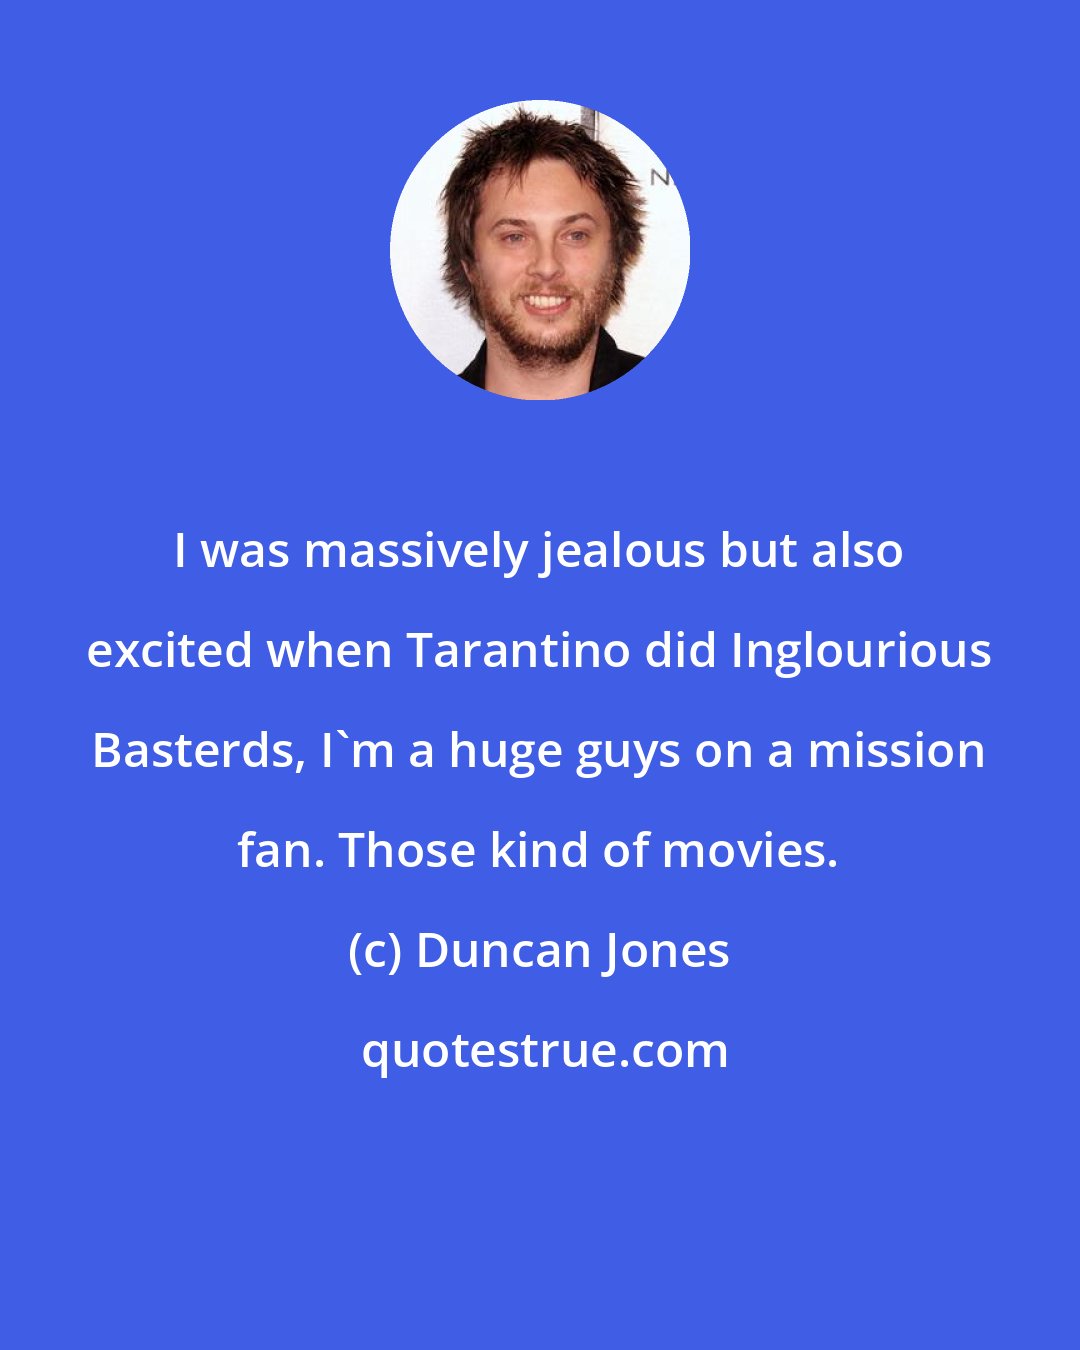 Duncan Jones: I was massively jealous but also excited when Tarantino did Inglourious Basterds, I'm a huge guys on a mission fan. Those kind of movies.